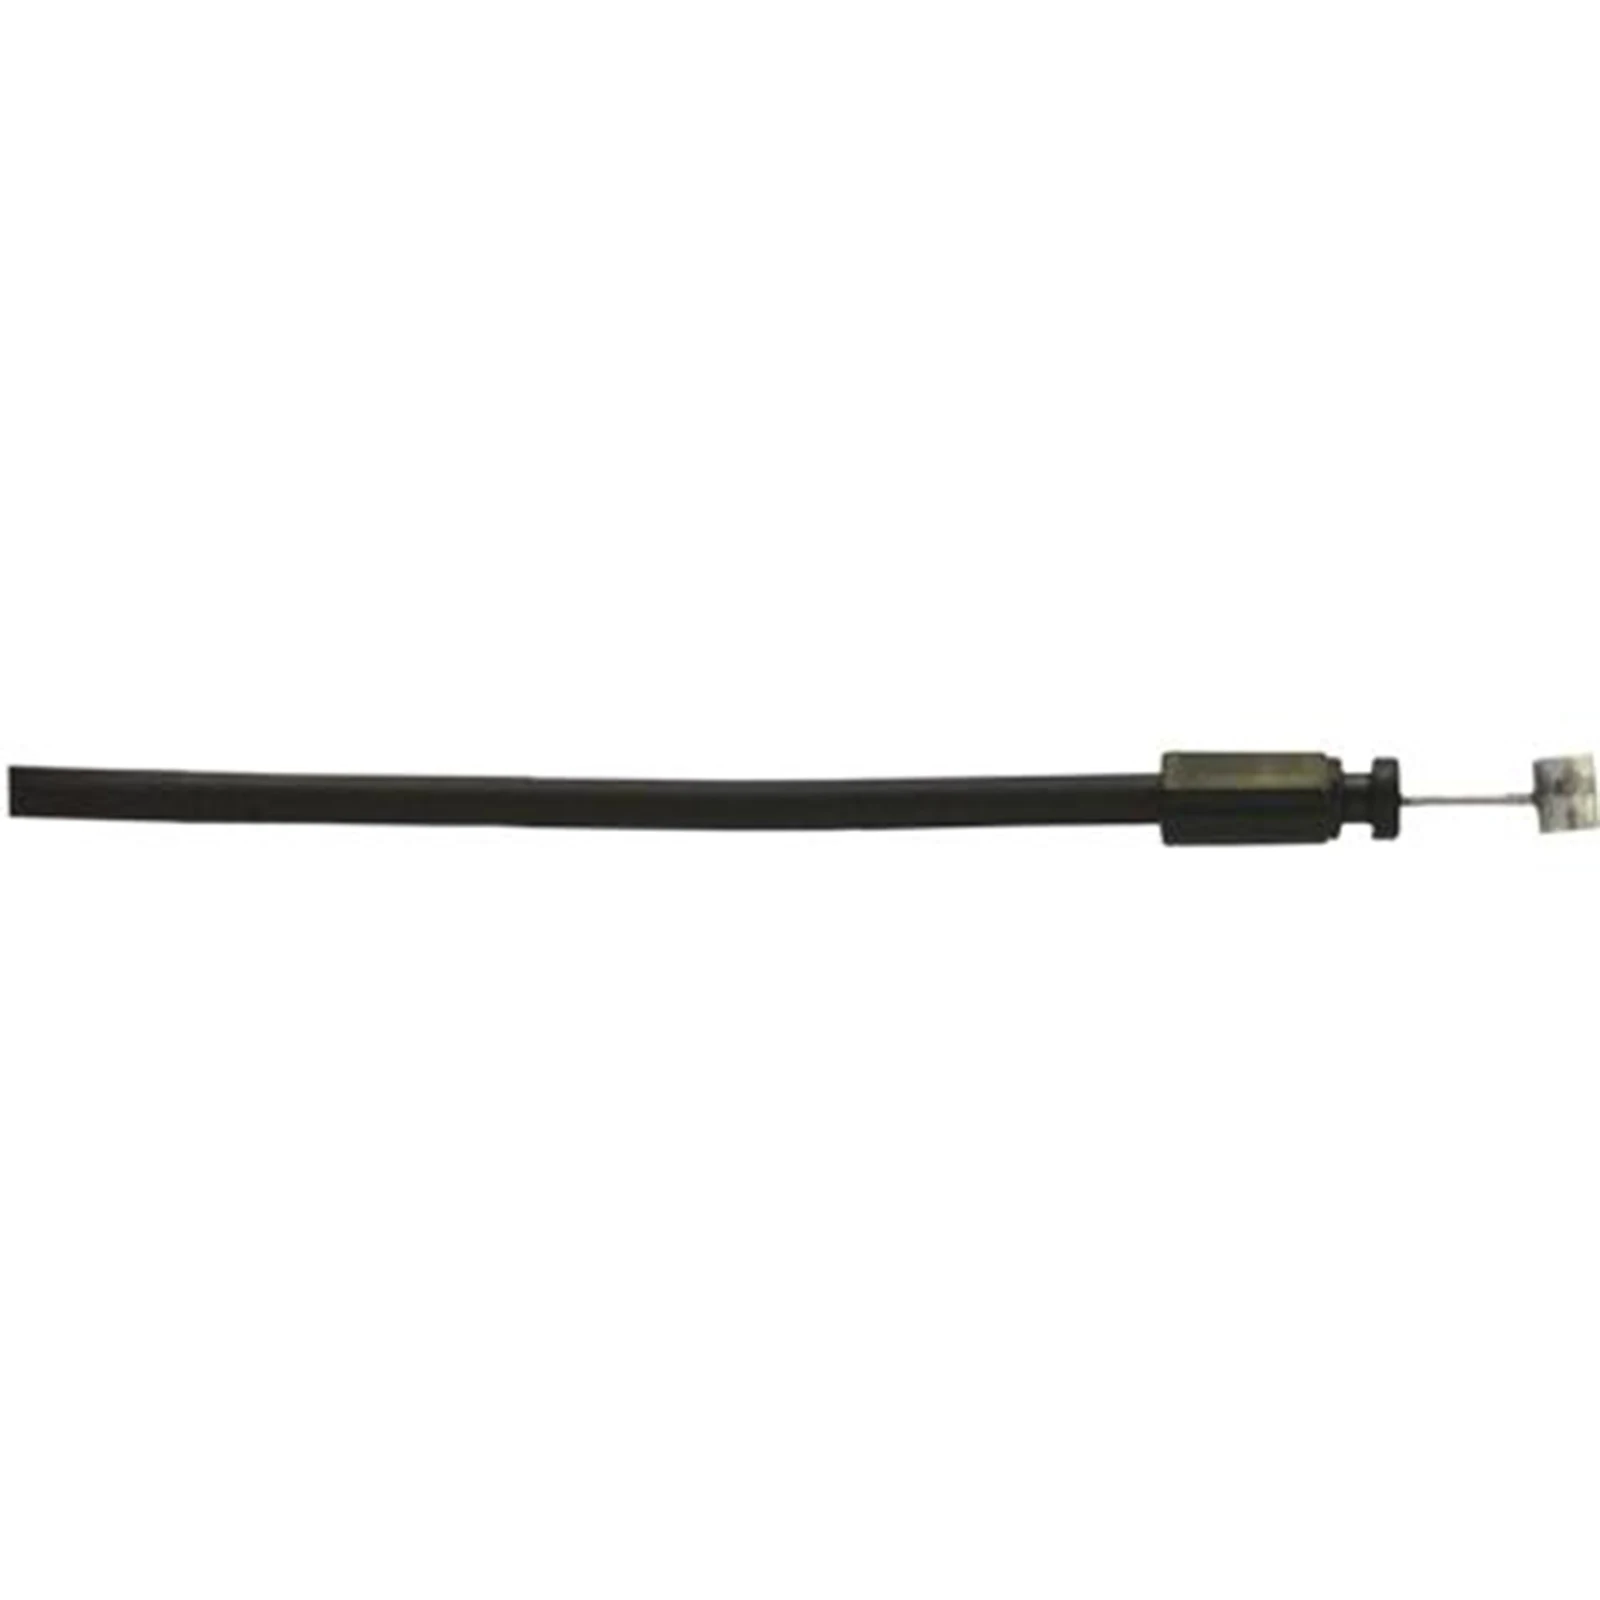 NEW Replace Recliner Release Cable For Couch Hardware Supplies 120mm Chairs And Sofas 120MM Recliner Release Cable Replacement images - 6